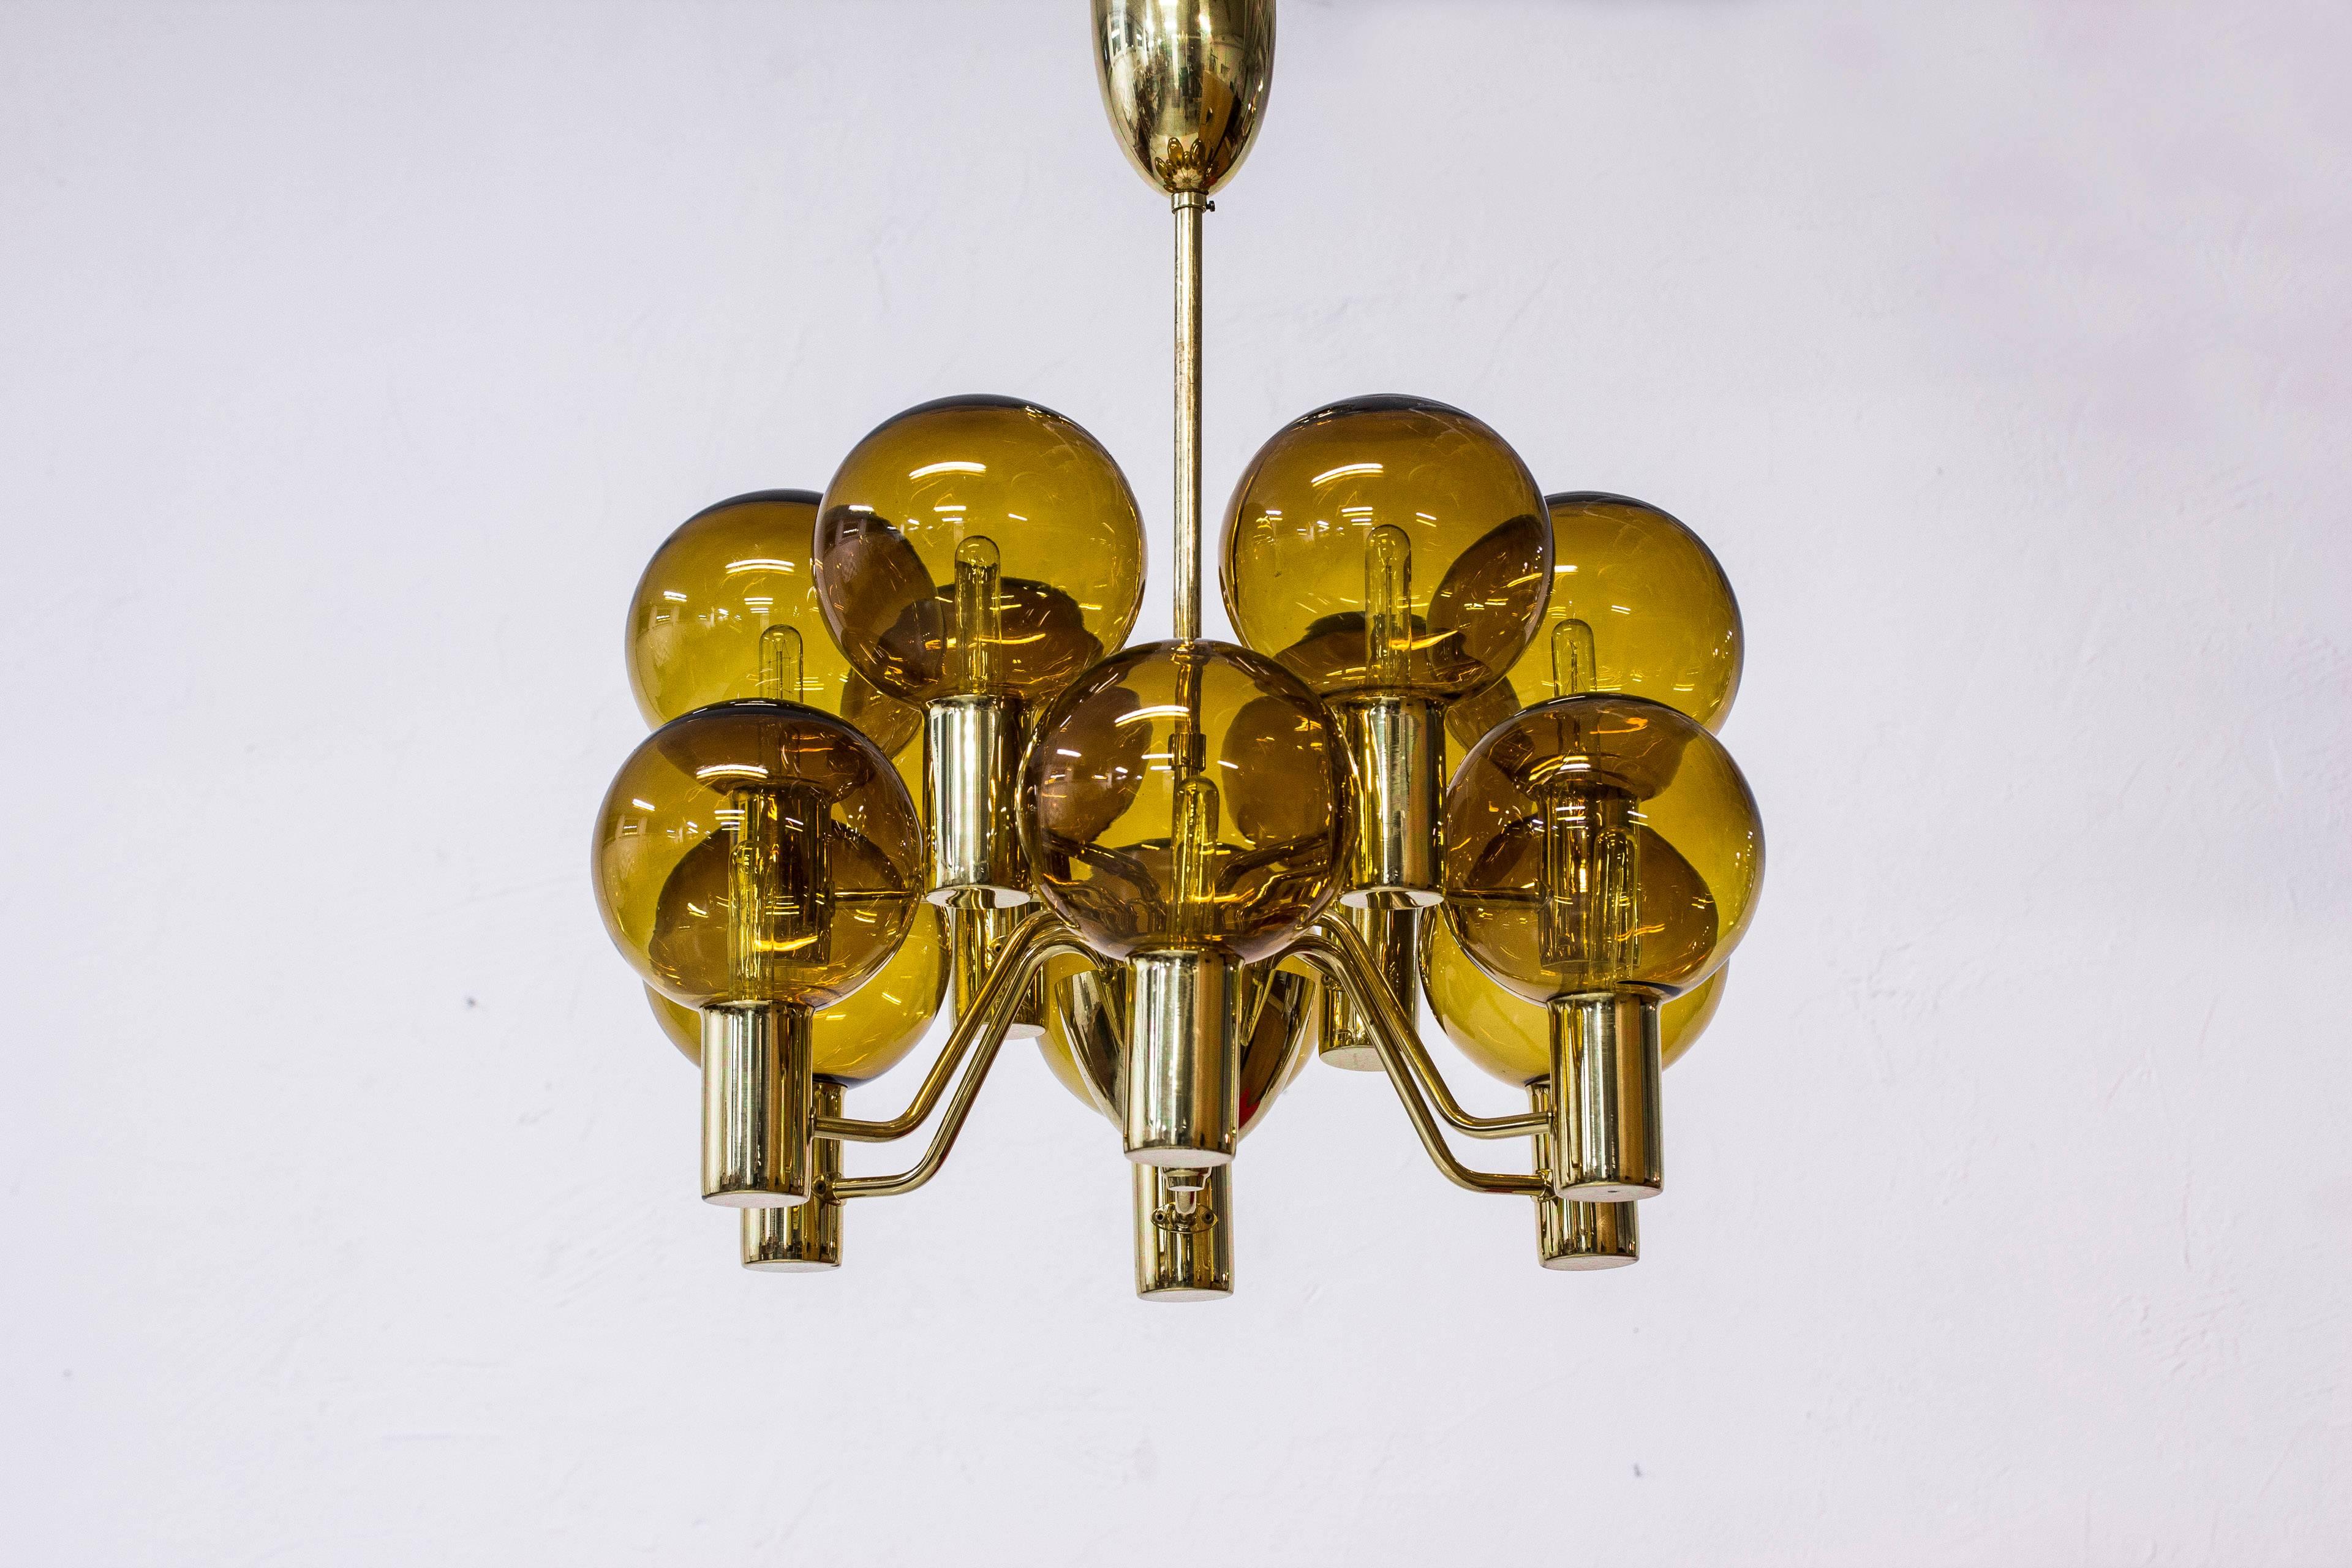 Chandelier model T372/12 designed by Hans Agne Jakobsson. Produced in Sweden by his own company in Markaryd during the 1960s. Made from solid polished brass with 12 arms and 12 handblown amber colored glass shades. Excellent vintage condition with